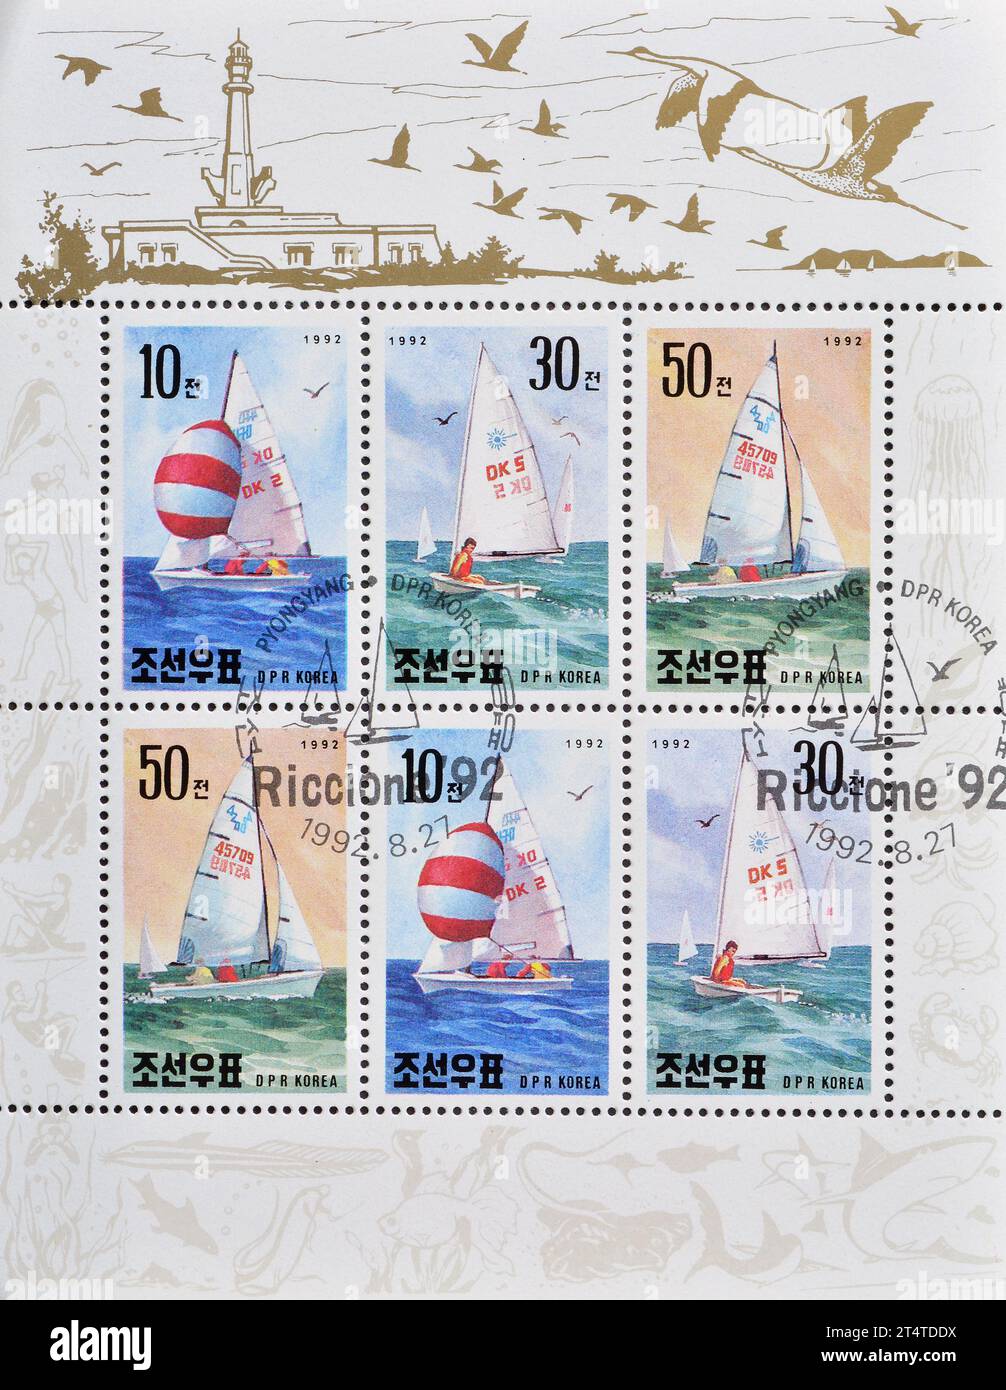 Souvenir Sheet with cancelled postage stamps printed by North Korea, that show Riccione'92 boat racing, circa 1992. Stock Photo